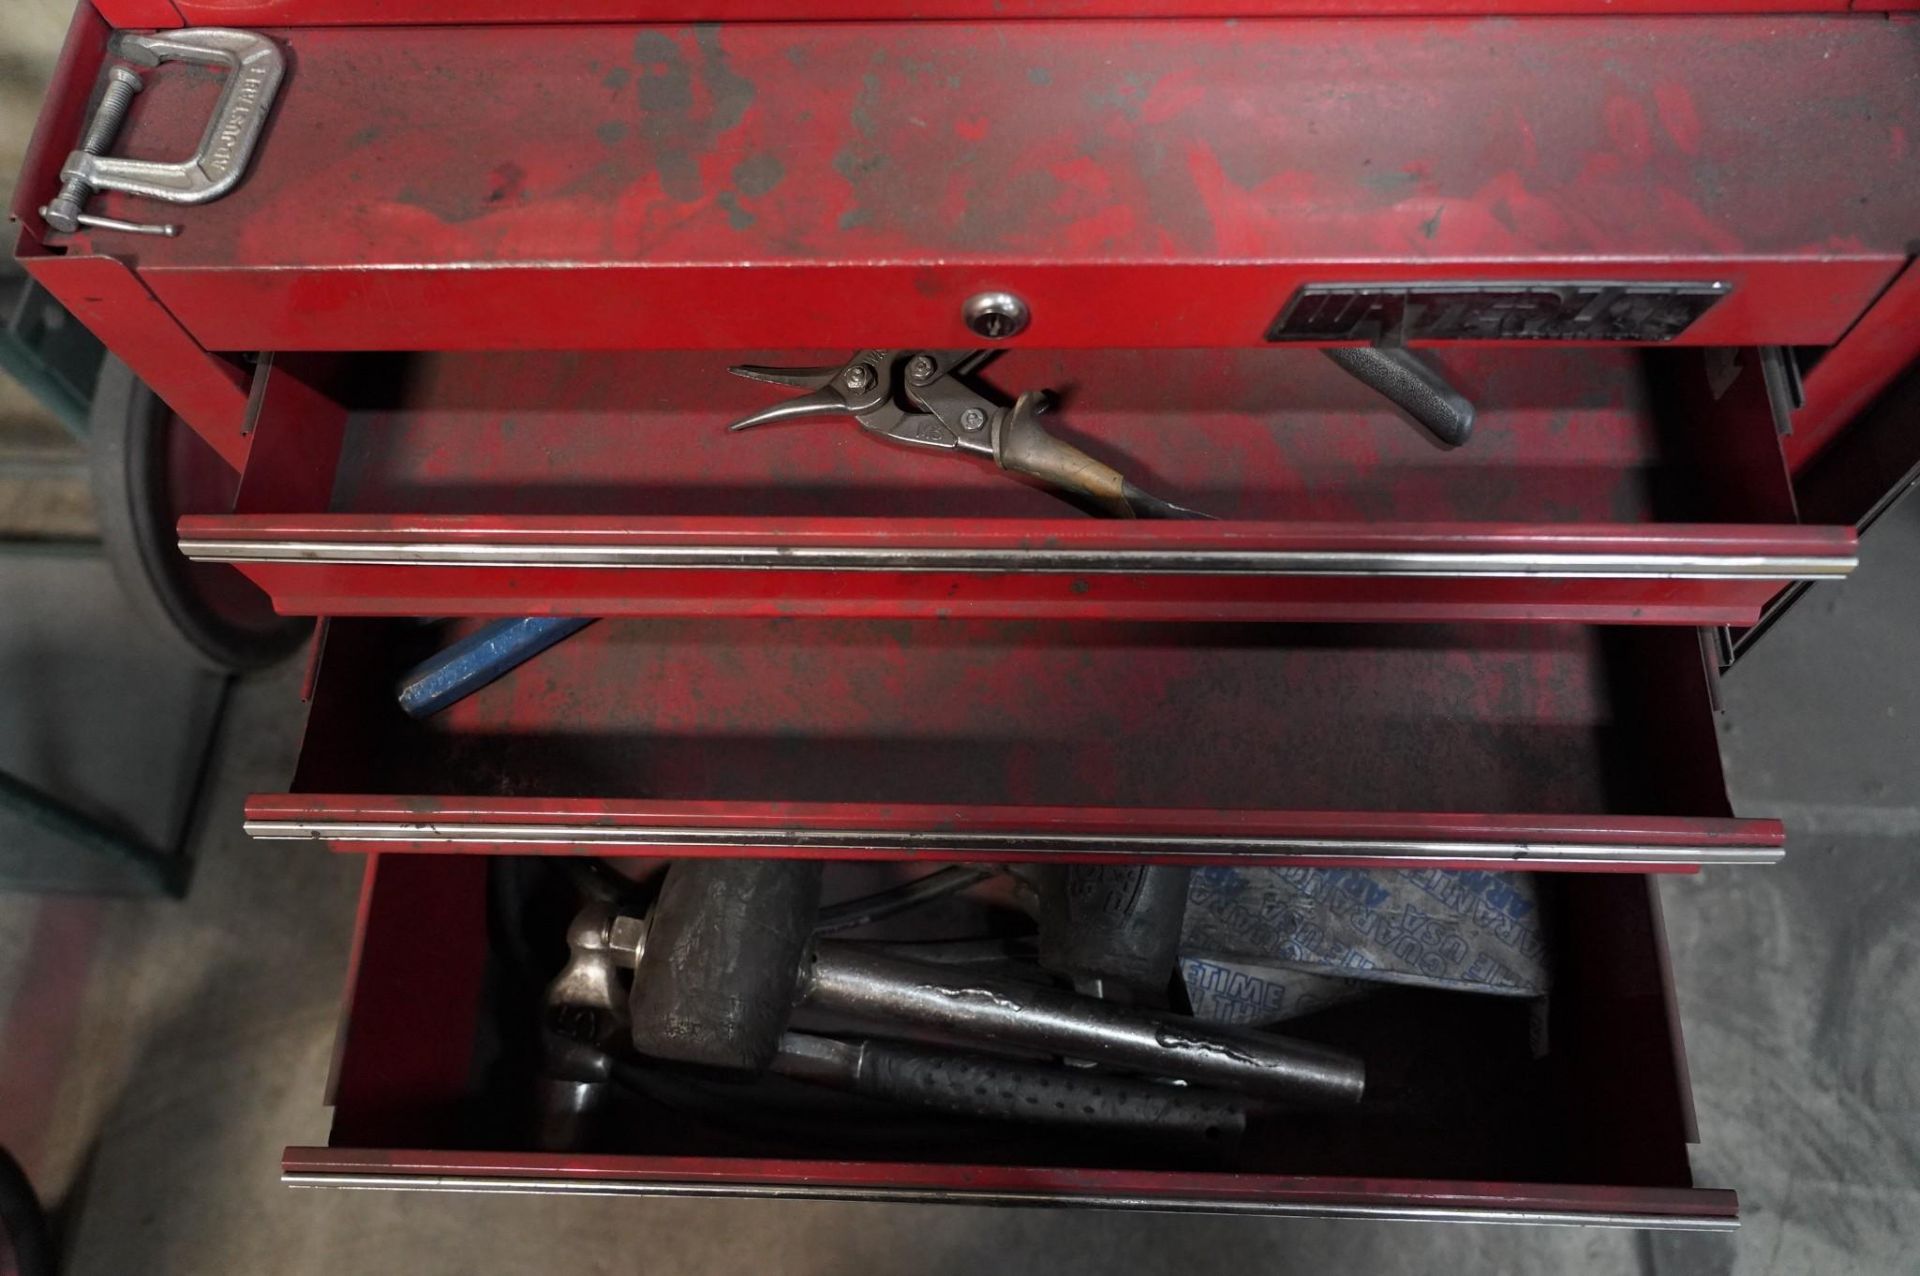 WATERLOG 10 DRAWER ROLLING TOOL CHEST - Image 4 of 4